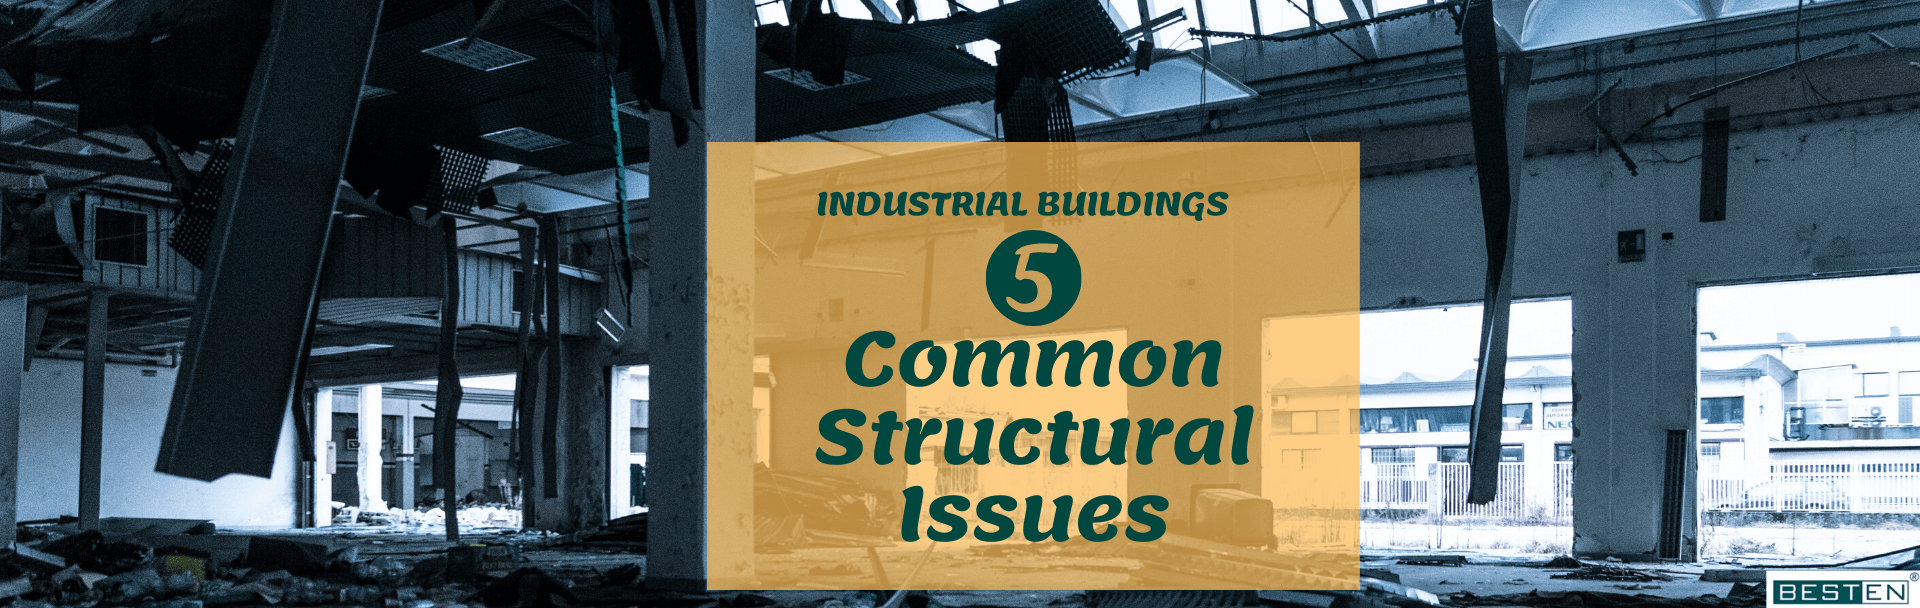 Structural design in factory infrastructure